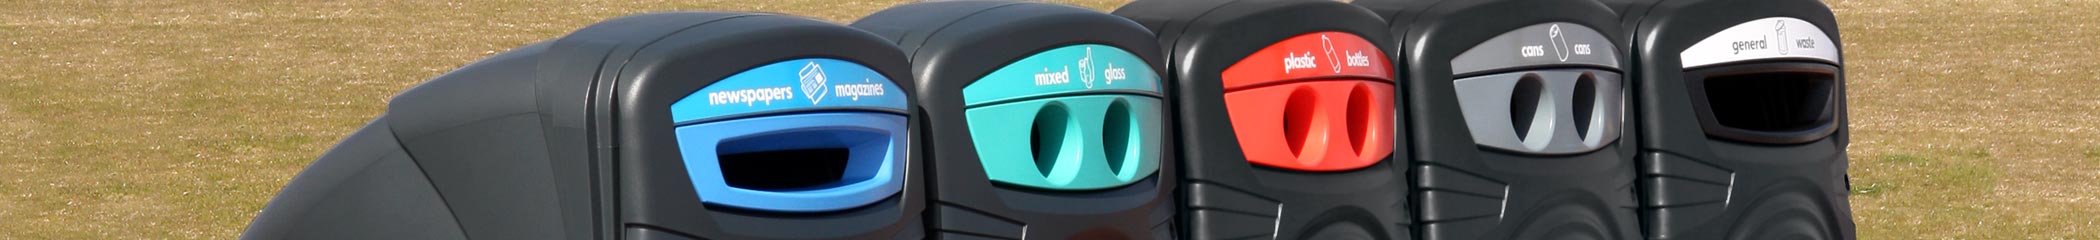 outdoor recycling bins banner